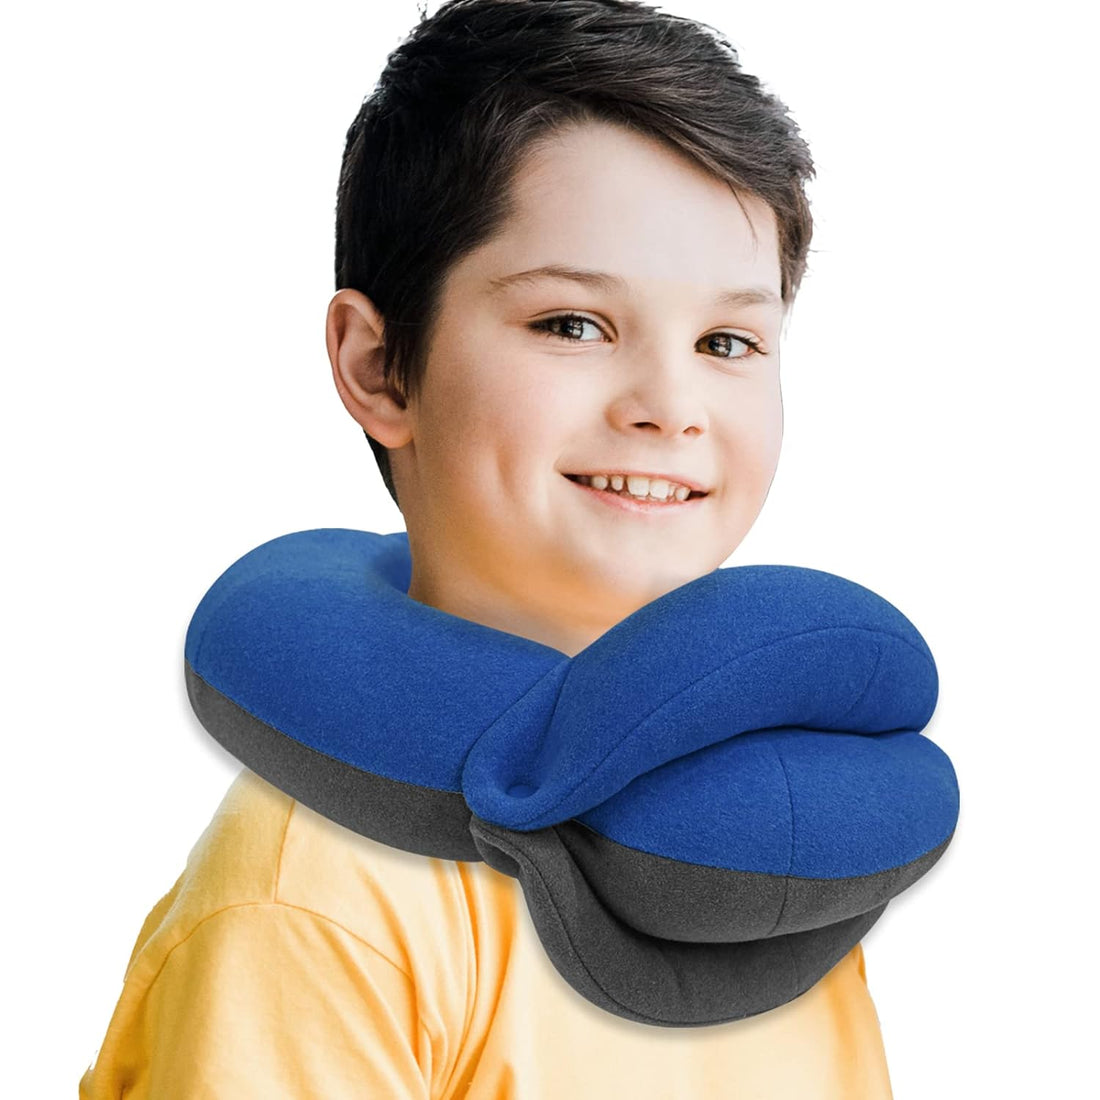 BUYUE Kids Travel Pillows for Airplane, 360° Head Support Sleeping Essentials for Boys Long Flight, Skin-Friendly Soft Neck Pillow for Traveling in Car Seat, Small, Blue Grey